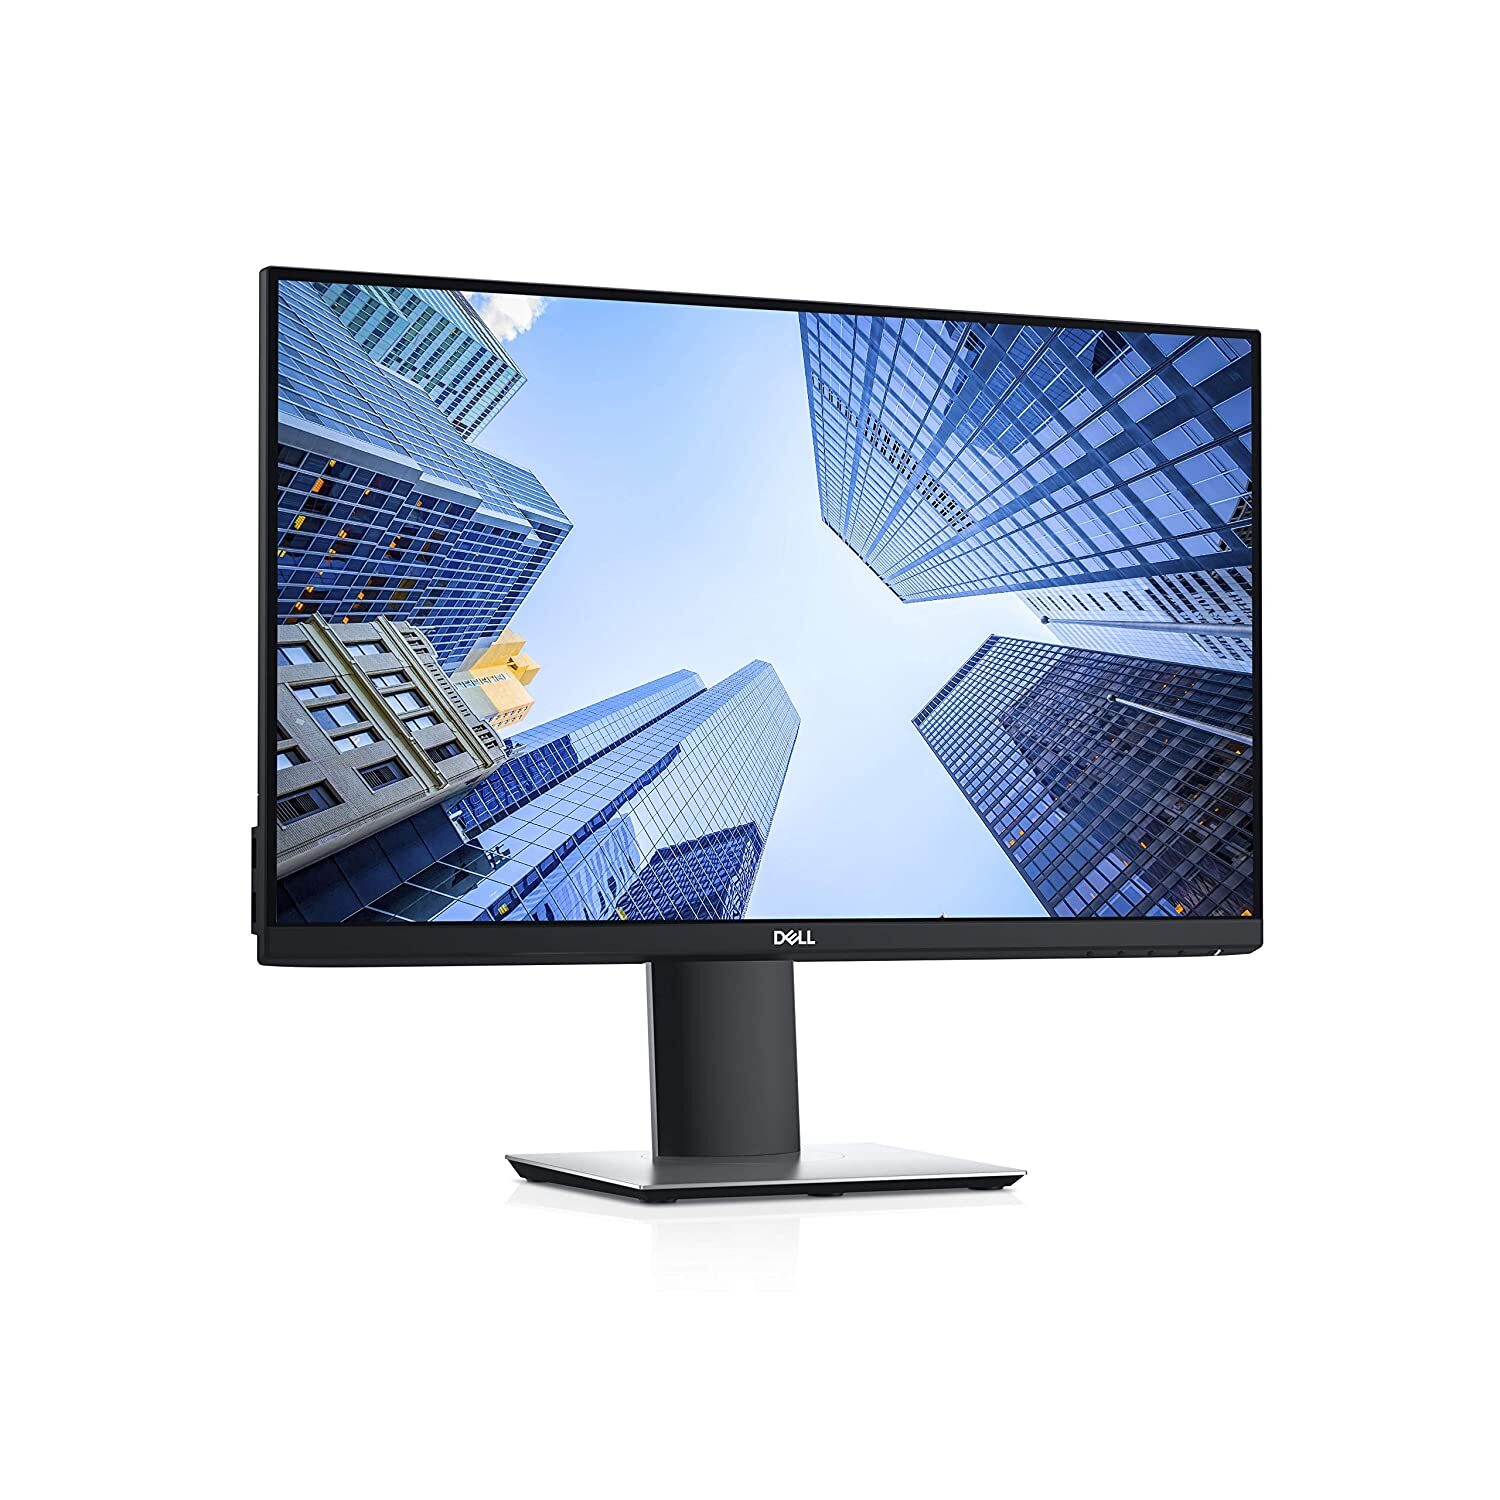 Dell P Series 24-inch (60.96 cm) Screen Full HD (1080p) LED-Lit Monitor with IPS Panel - P2419H (Black)